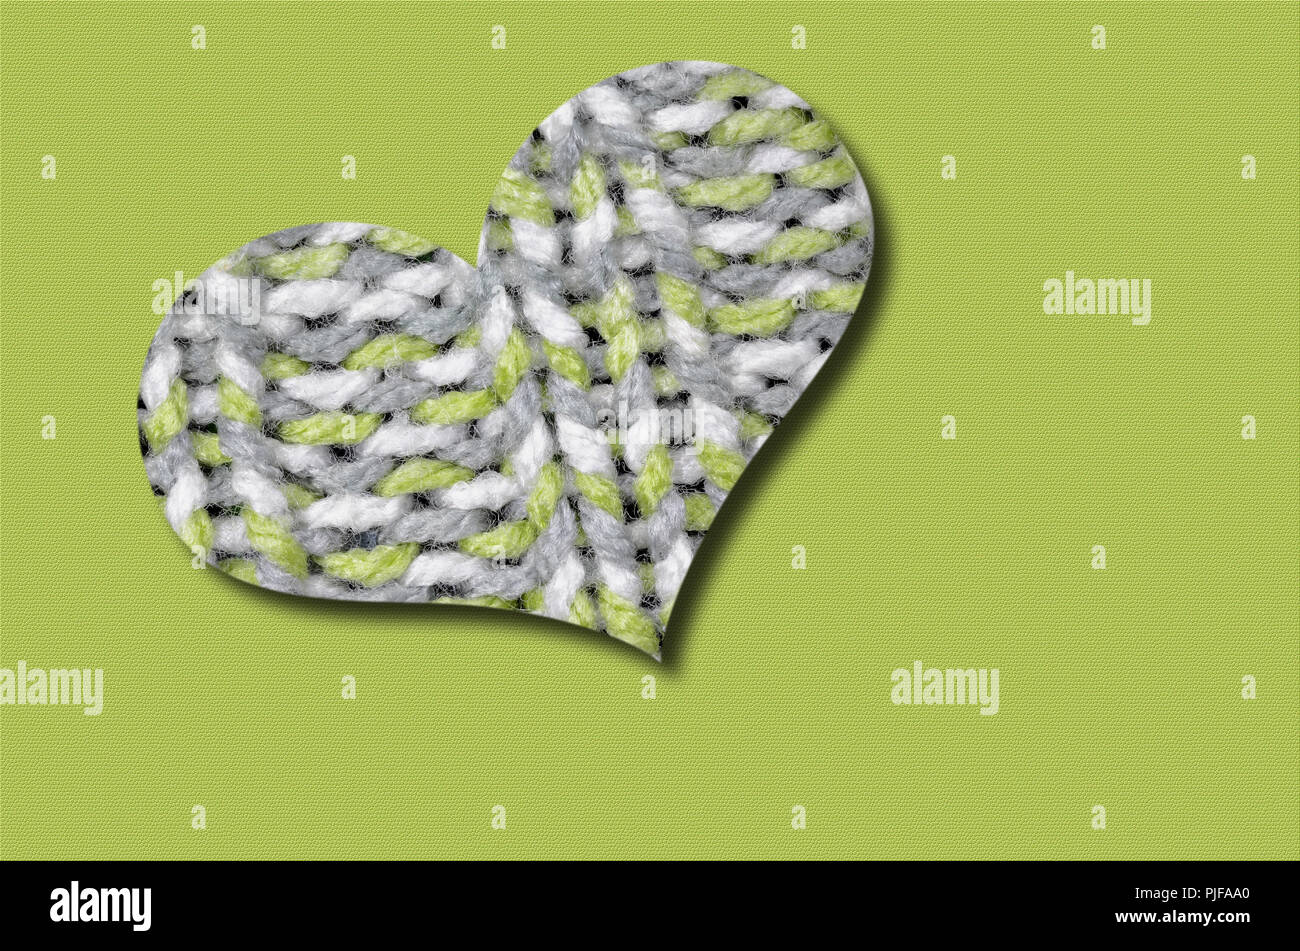 knitted heart, light green, gray and white, isolated on light green background Stock Photo